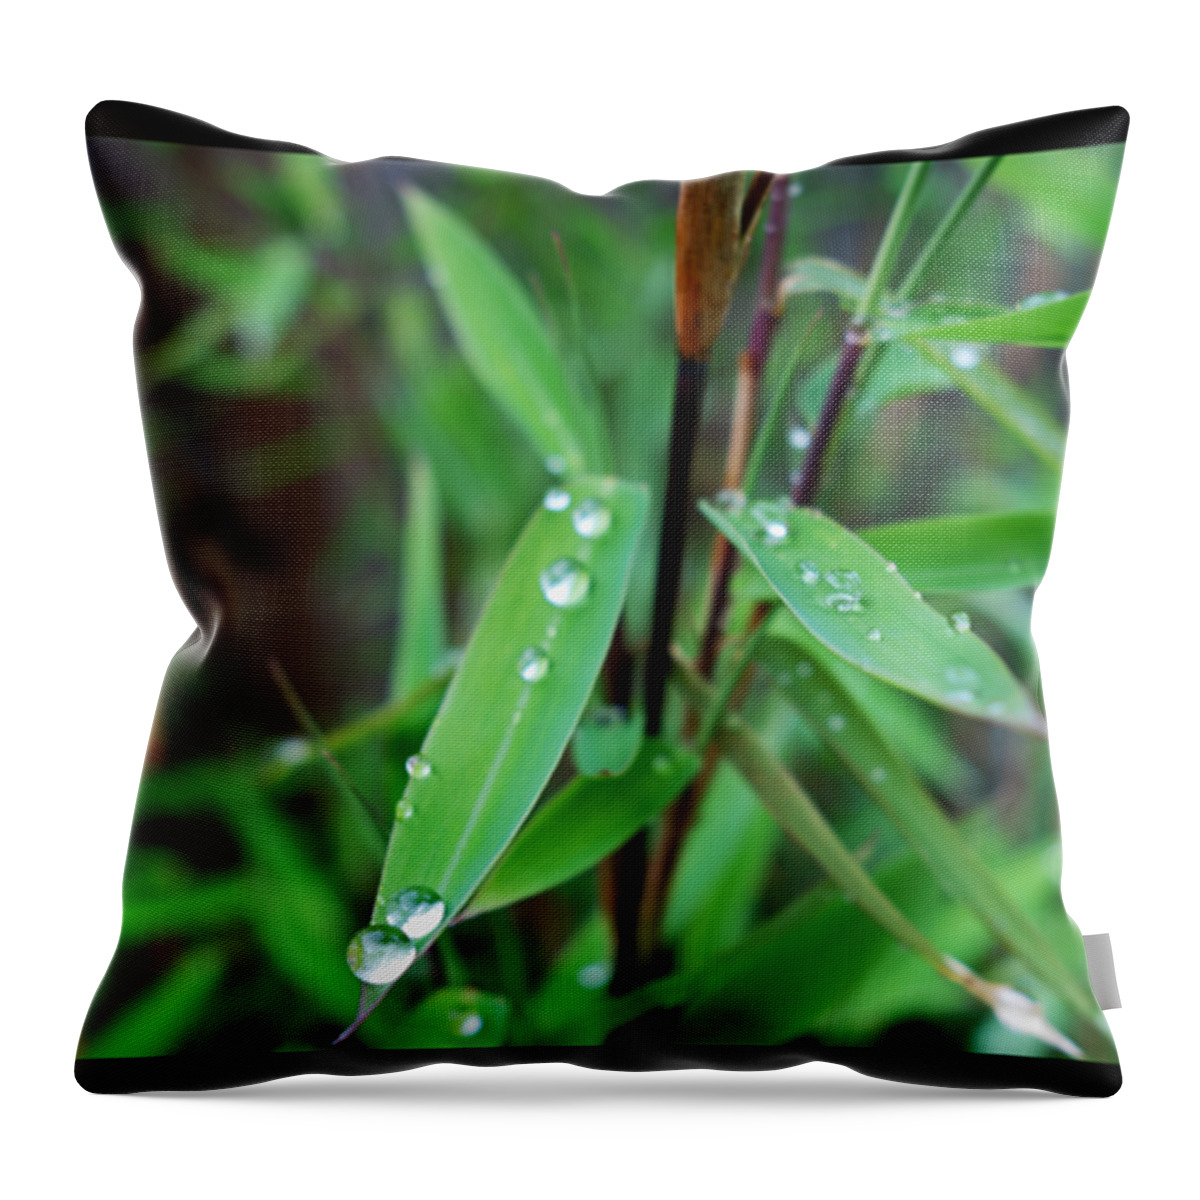 Rain Drops Throw Pillow featuring the painting Rain On Bamboo by Charles Stuart